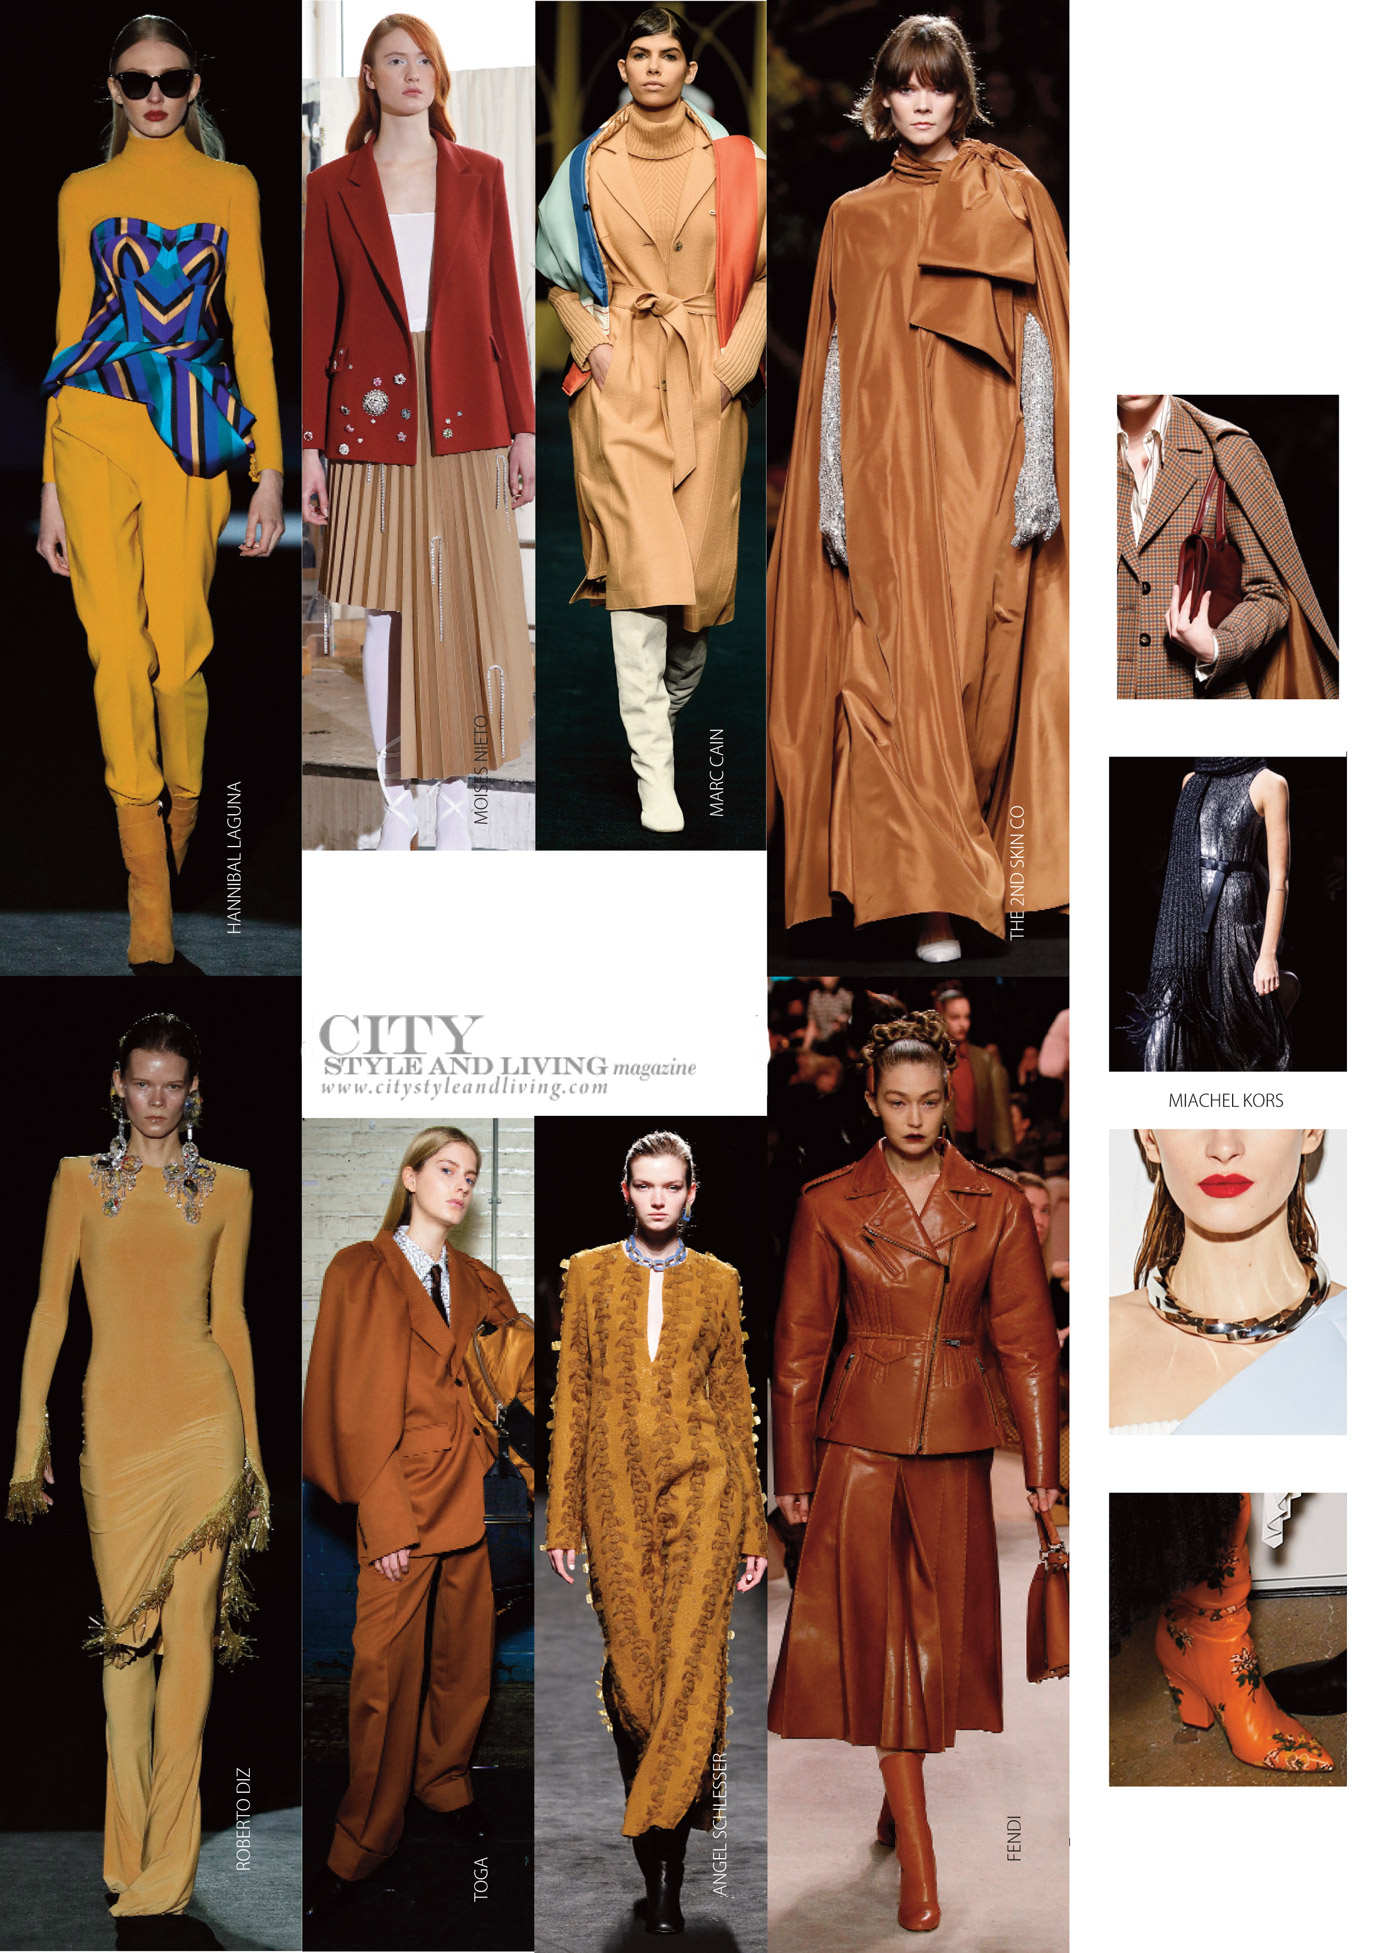 City Style and Living Magazine Winter 2020 3 Ways the Runway Will Inspire You part 2